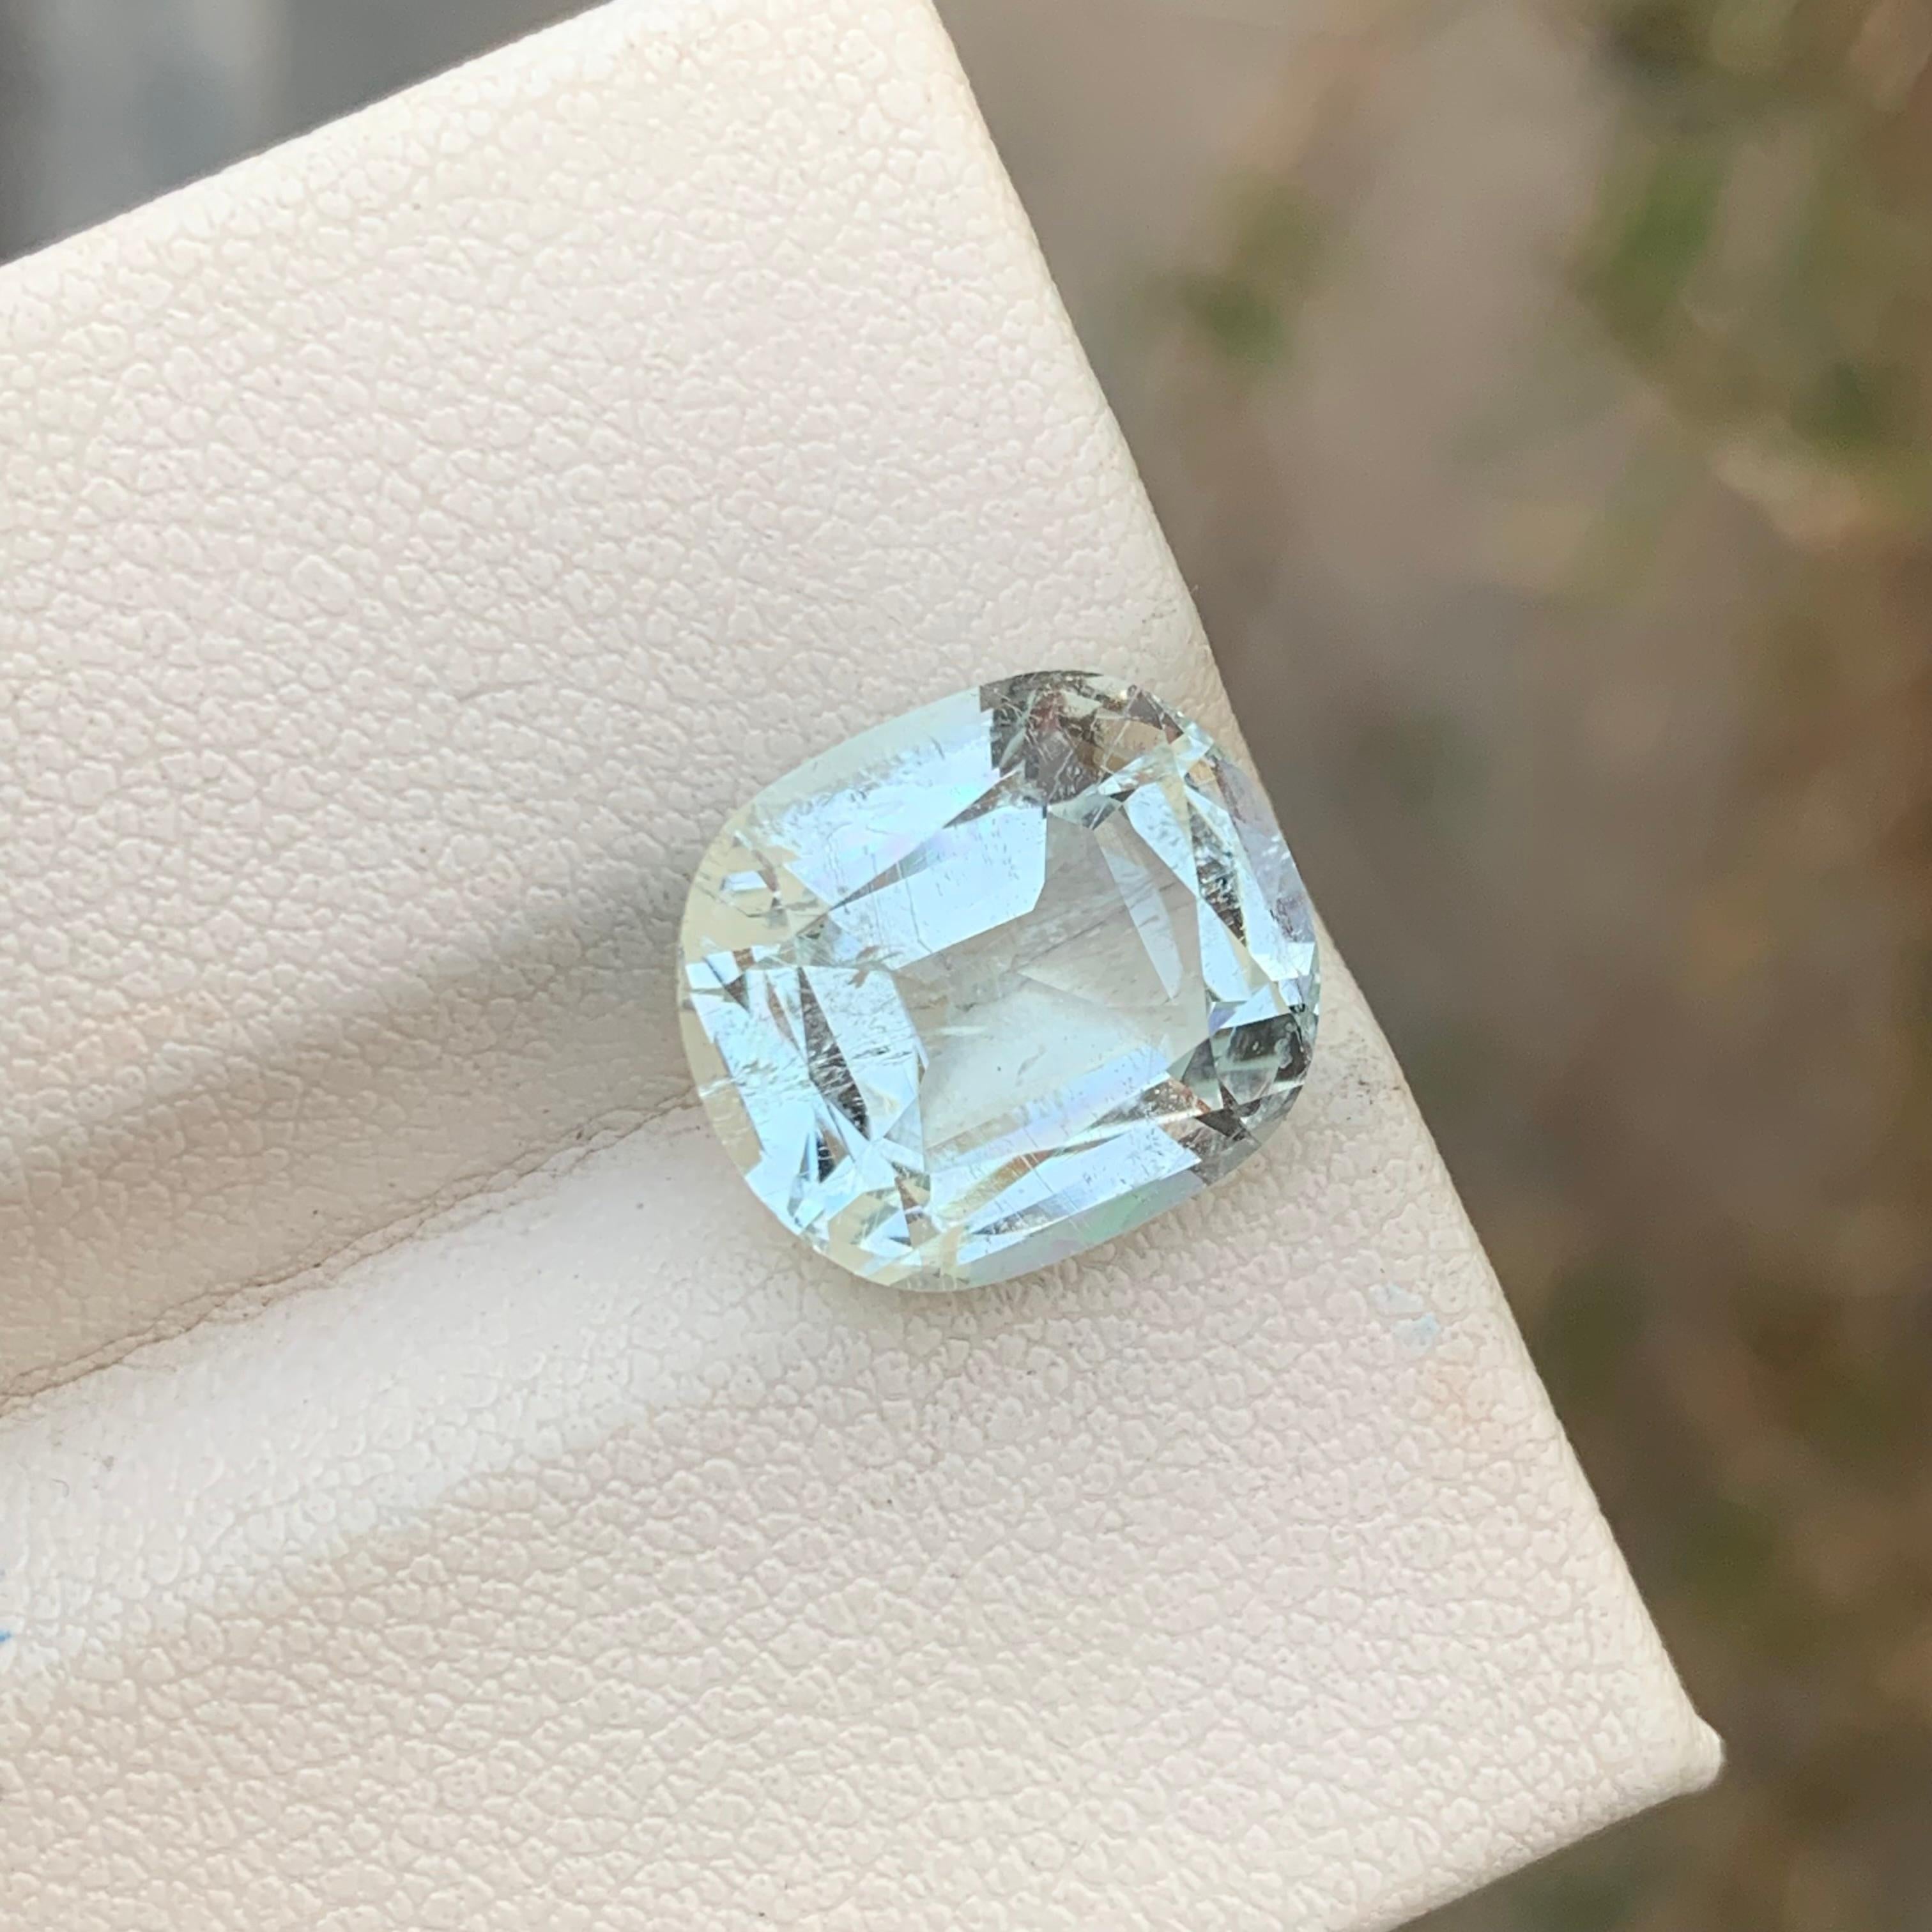 Loose Aquamarine 
Weight: 5.80 Carats 
Dimension: 12.5x11x7 Mm
Origin: Shigar Valley
Shape: Cushion
Quality: Inclusion 
Treatment: Non
Certificate: On Demand
Aquamarine, named after the Latin words for 